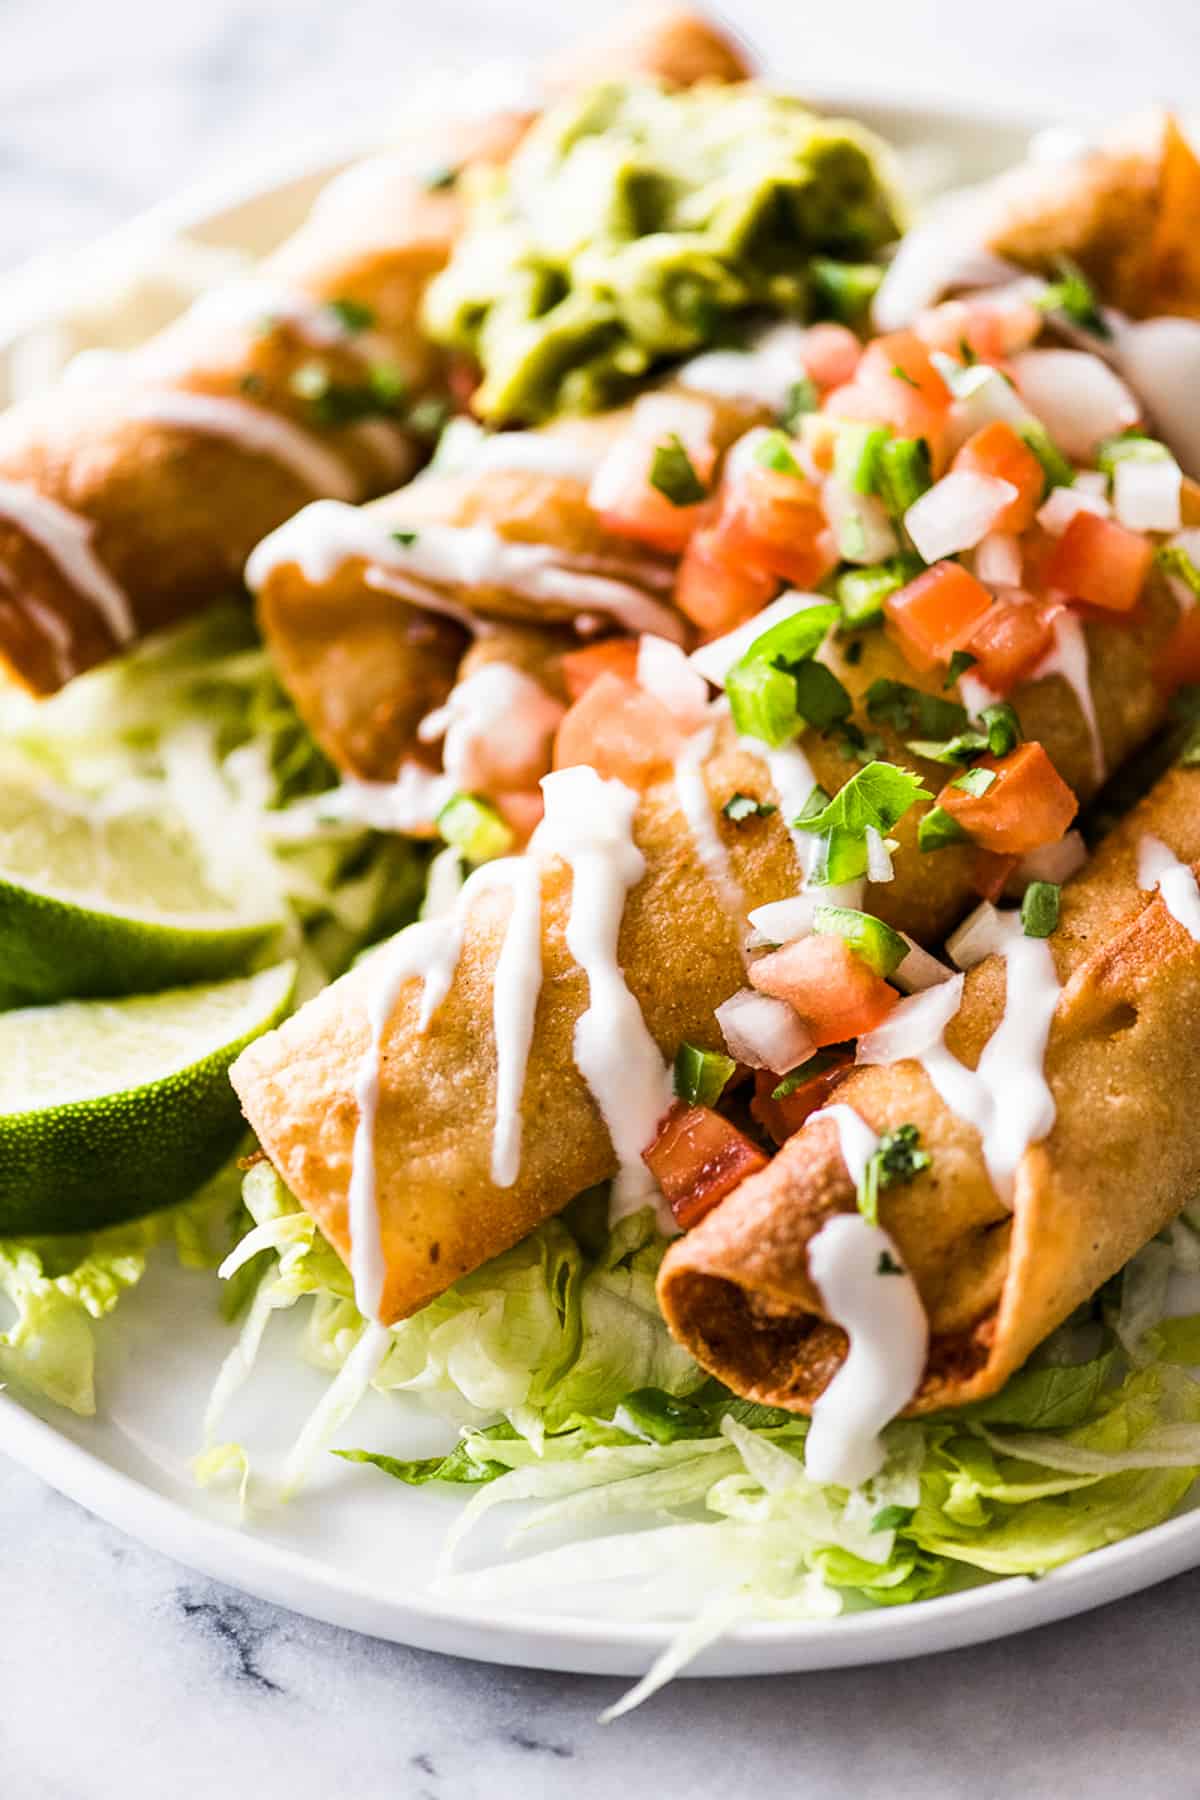 Crispy chicken taquitos on a plate with Mexican crema, shredded lettuce, and pico de gallo.